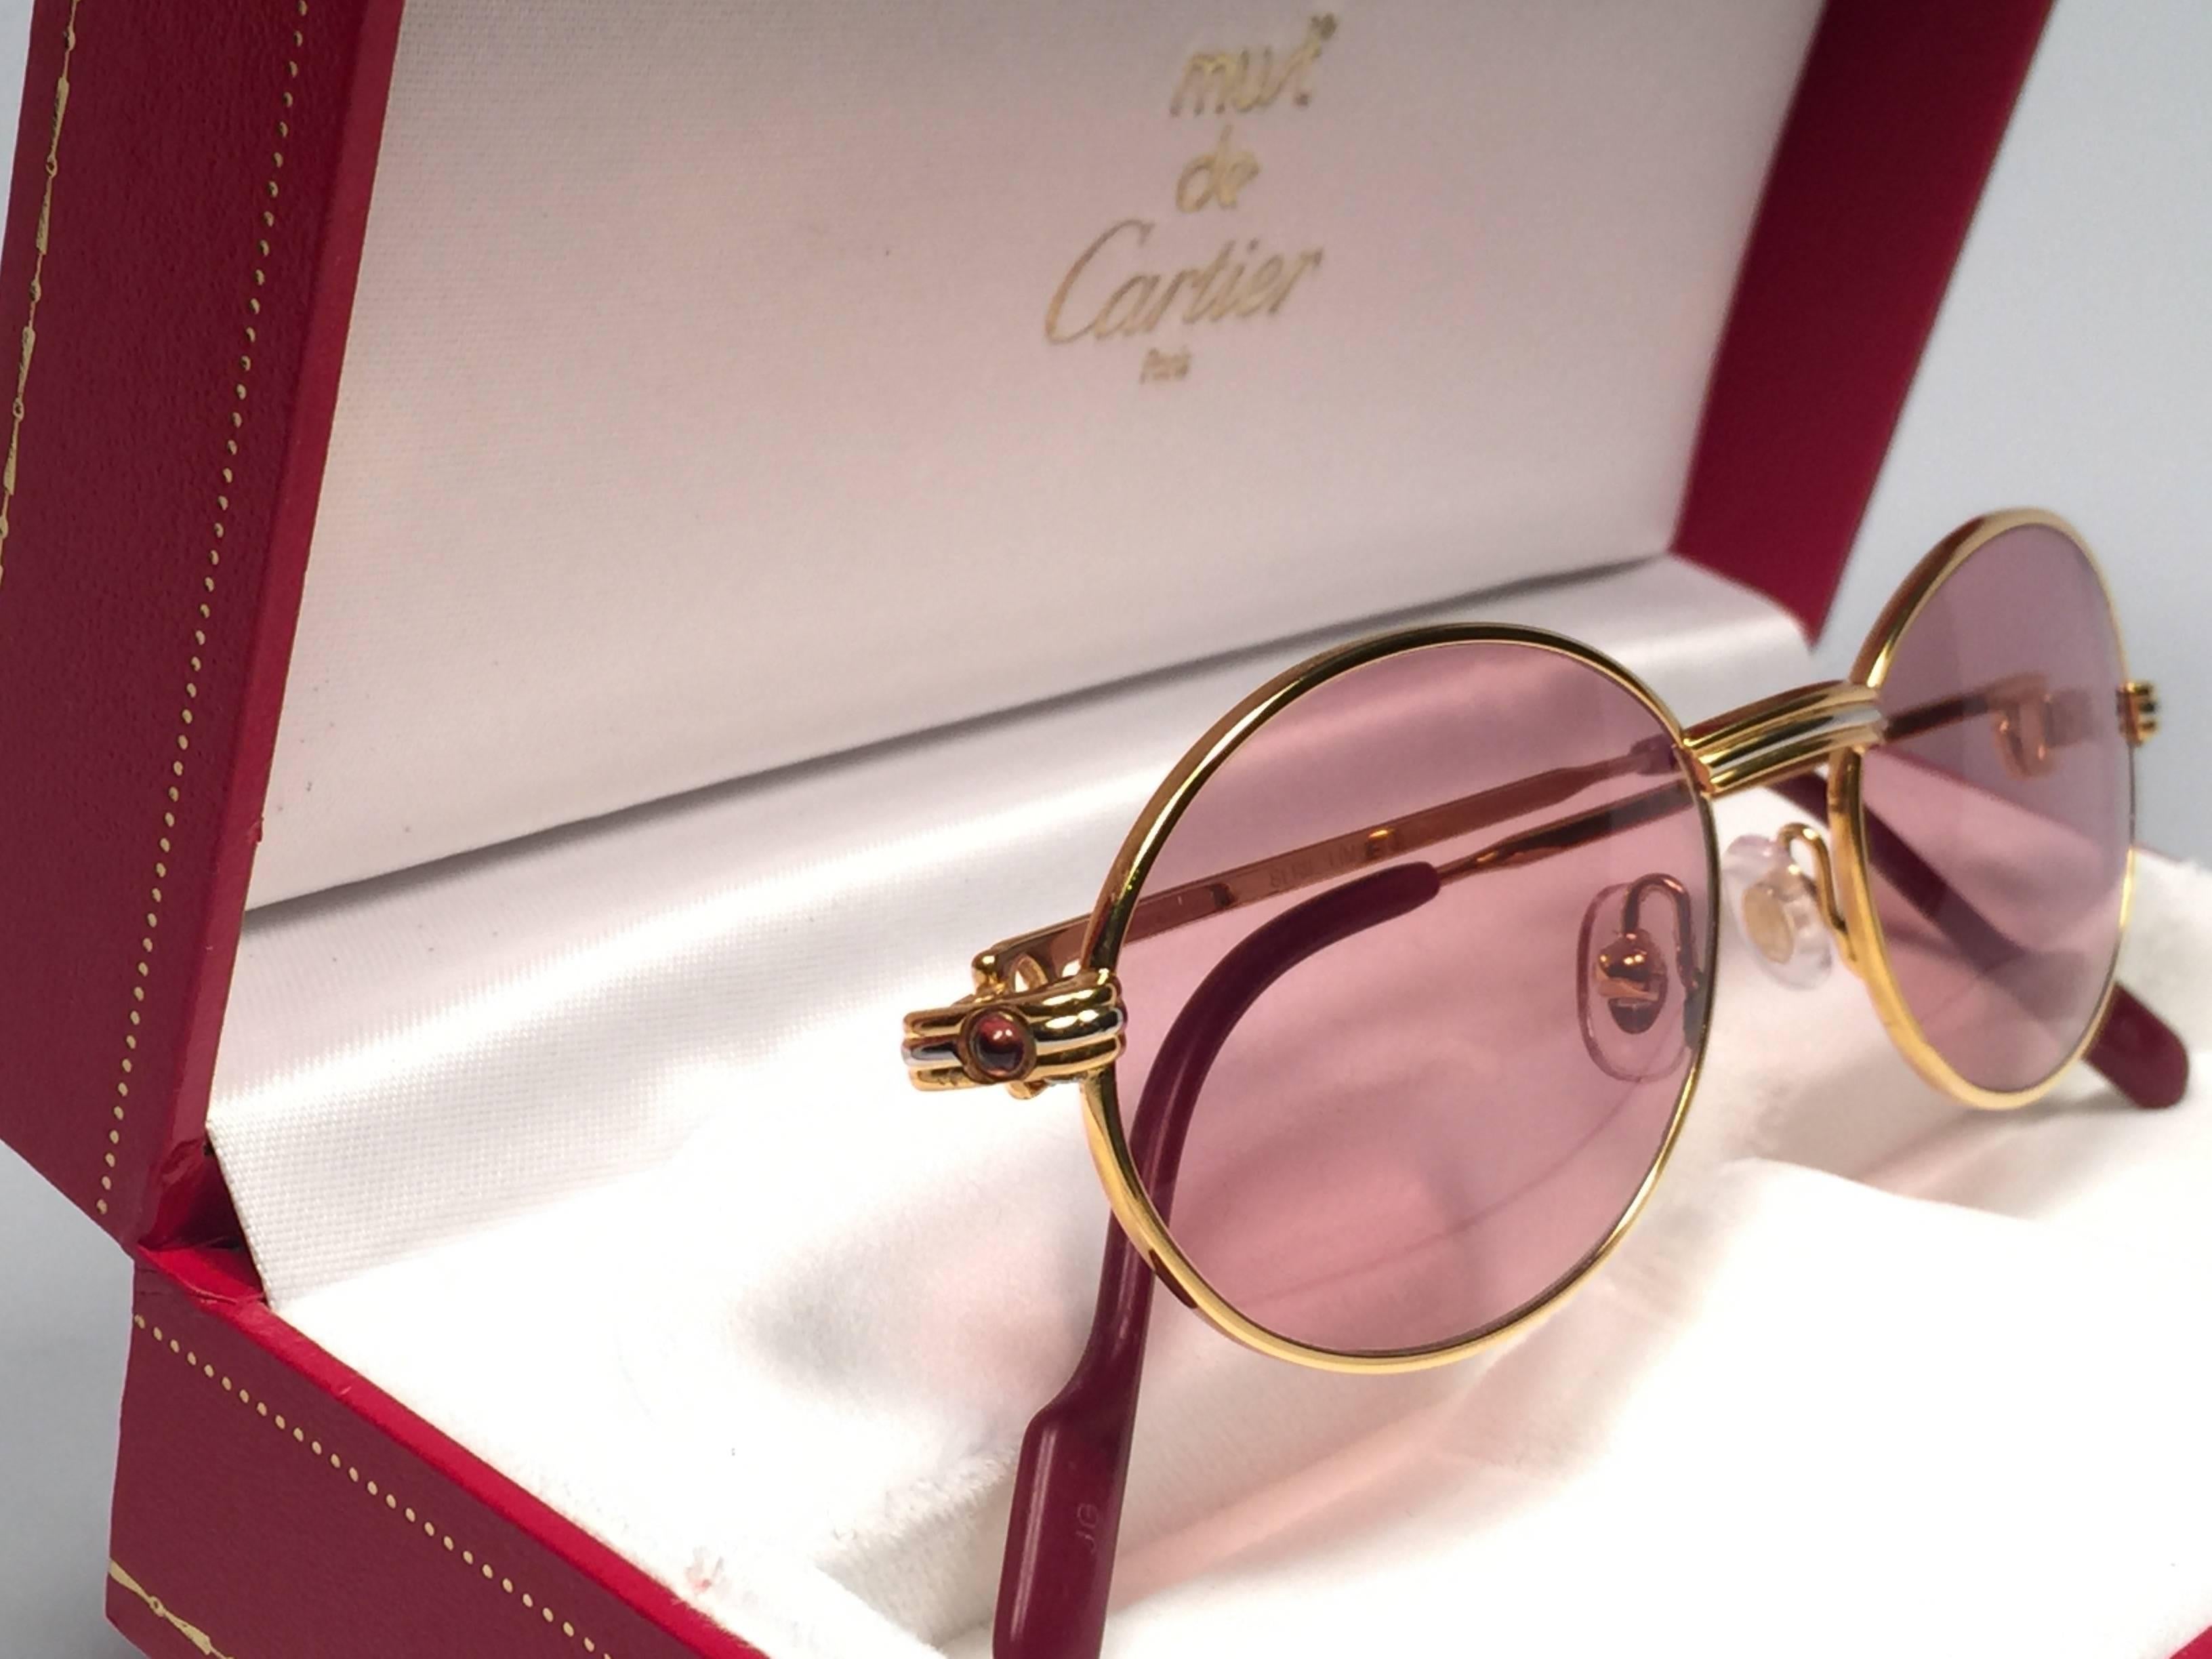 New Cartier oval St Honore Limited Series sunglasses adorned with two ruby gemstones on each side.
All hallmarks. Cartier signs on the ear paddles. 
Both arms sport the knot from Cartier on the temple. These are like a pair of jewels on your nose.